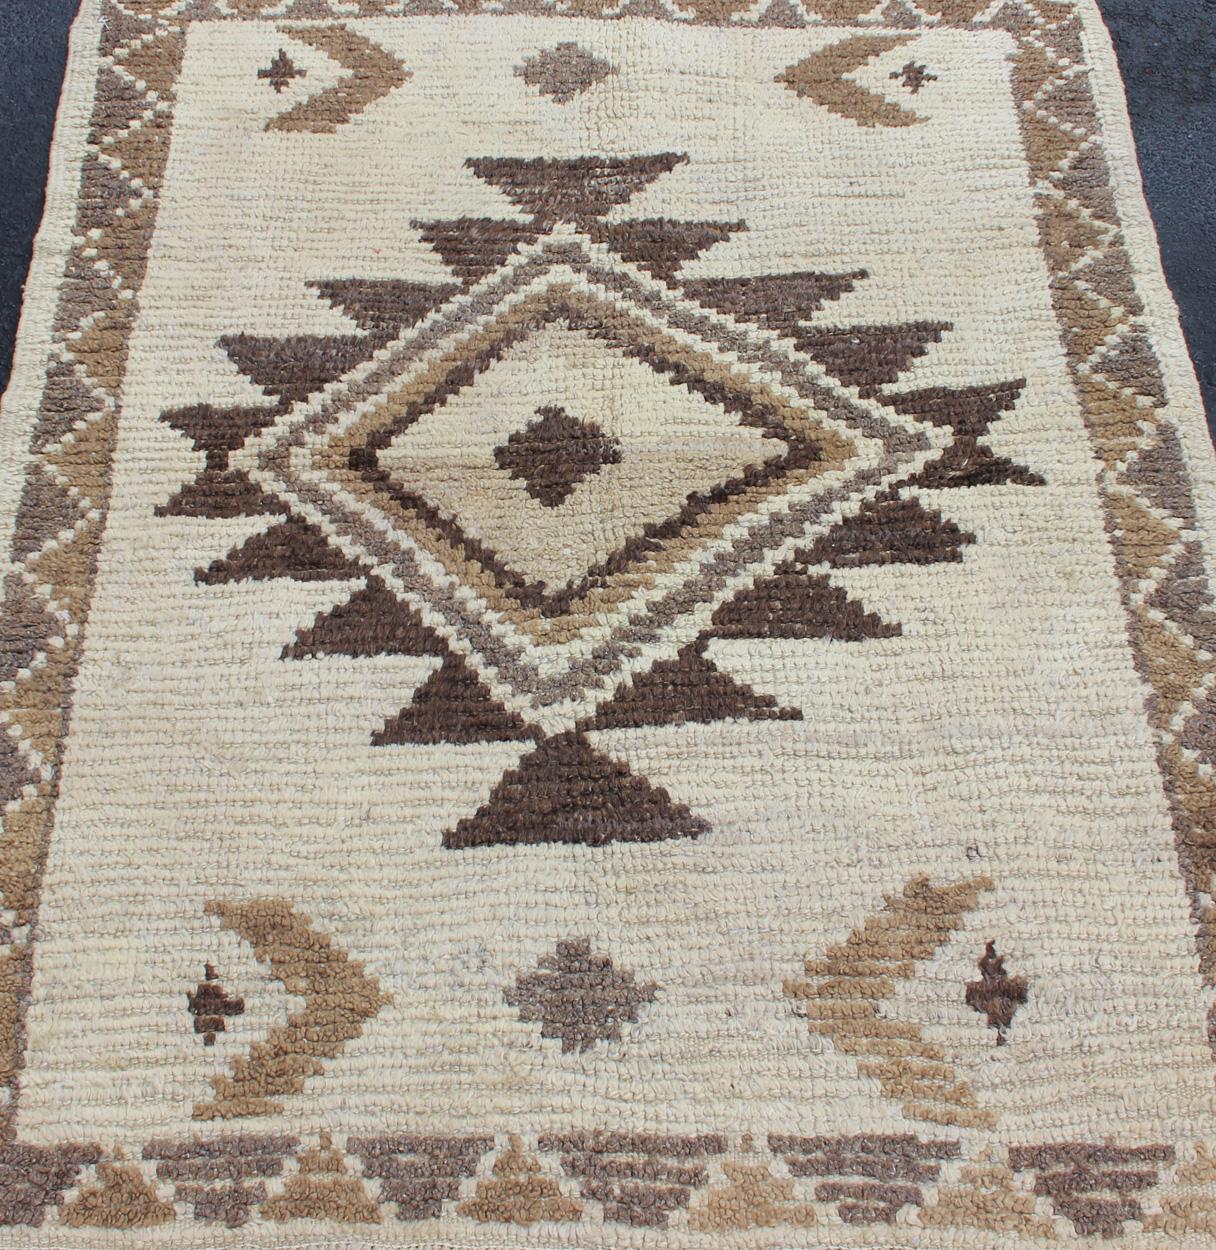 Natural Colors Turkish Tulu Carpet with Tribal Design in Shades of Earth Tones For Sale 1